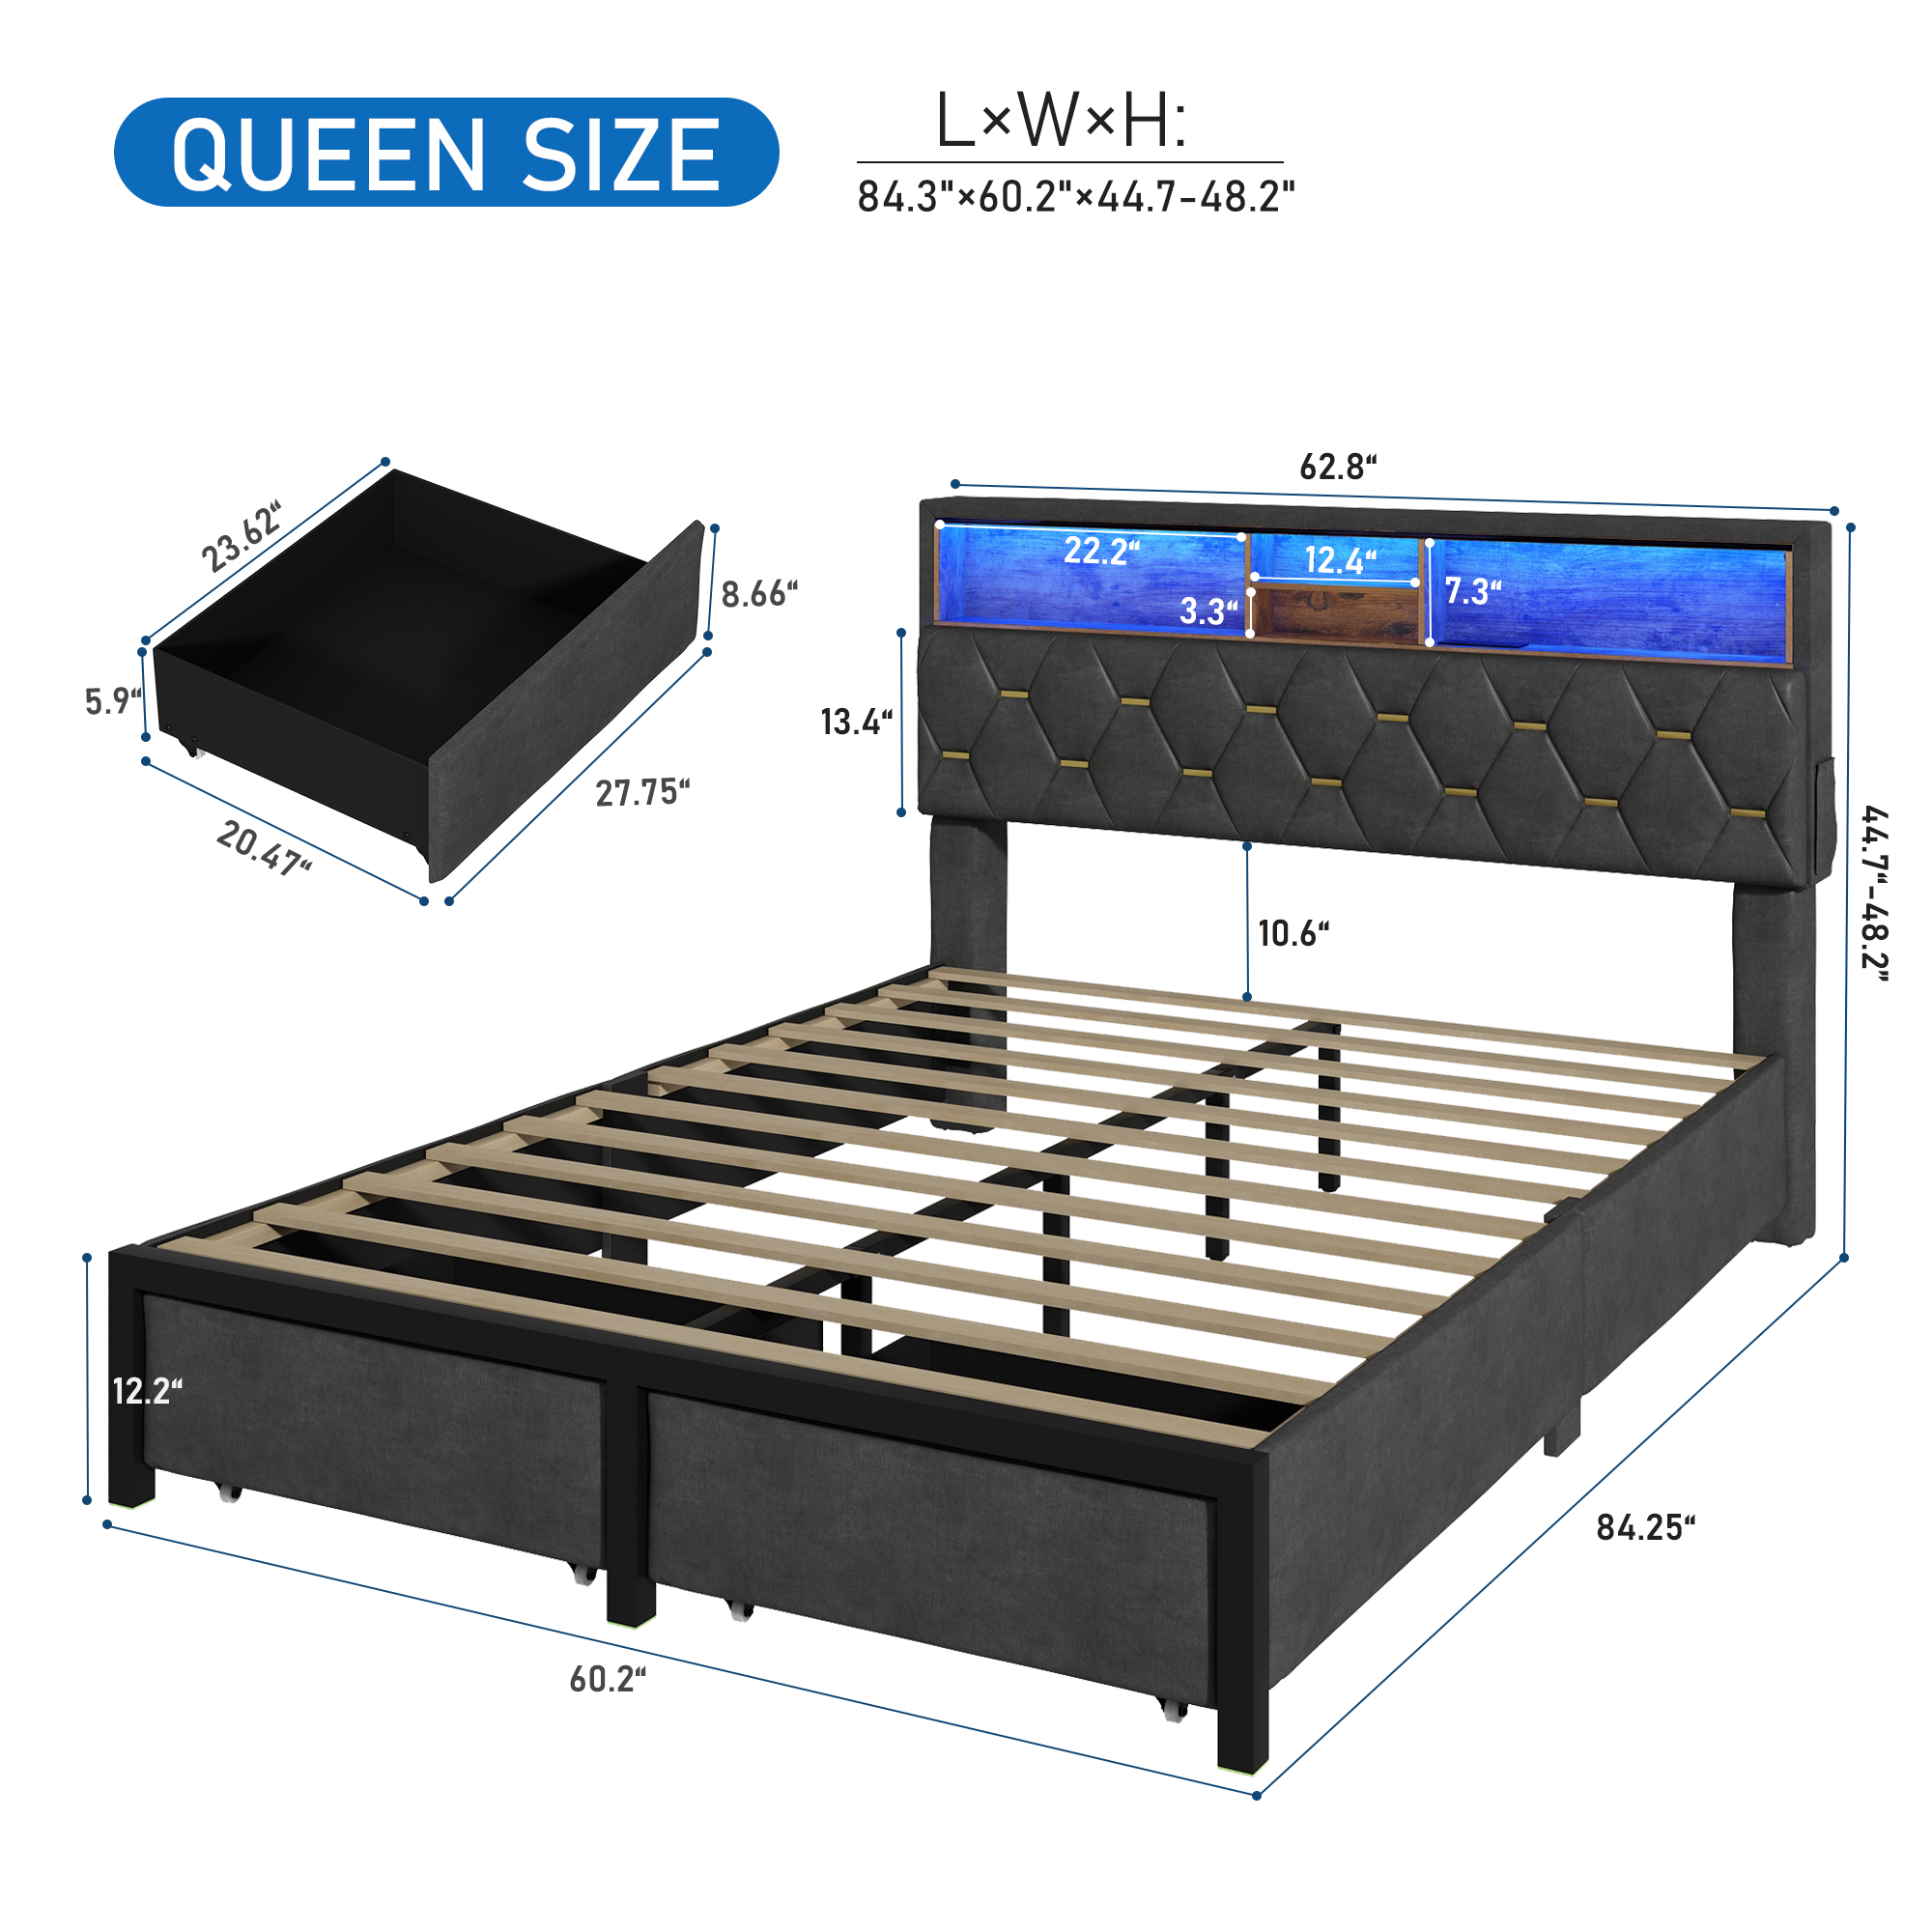 Queen Size LED Platform Bed Frame with Power Outlets & Flip-top Storage Headboard, Upholstered Storage Bed with Adjustable Headboard & 2 Drawers(Dark Grey1-Queen) - image 5 of 9